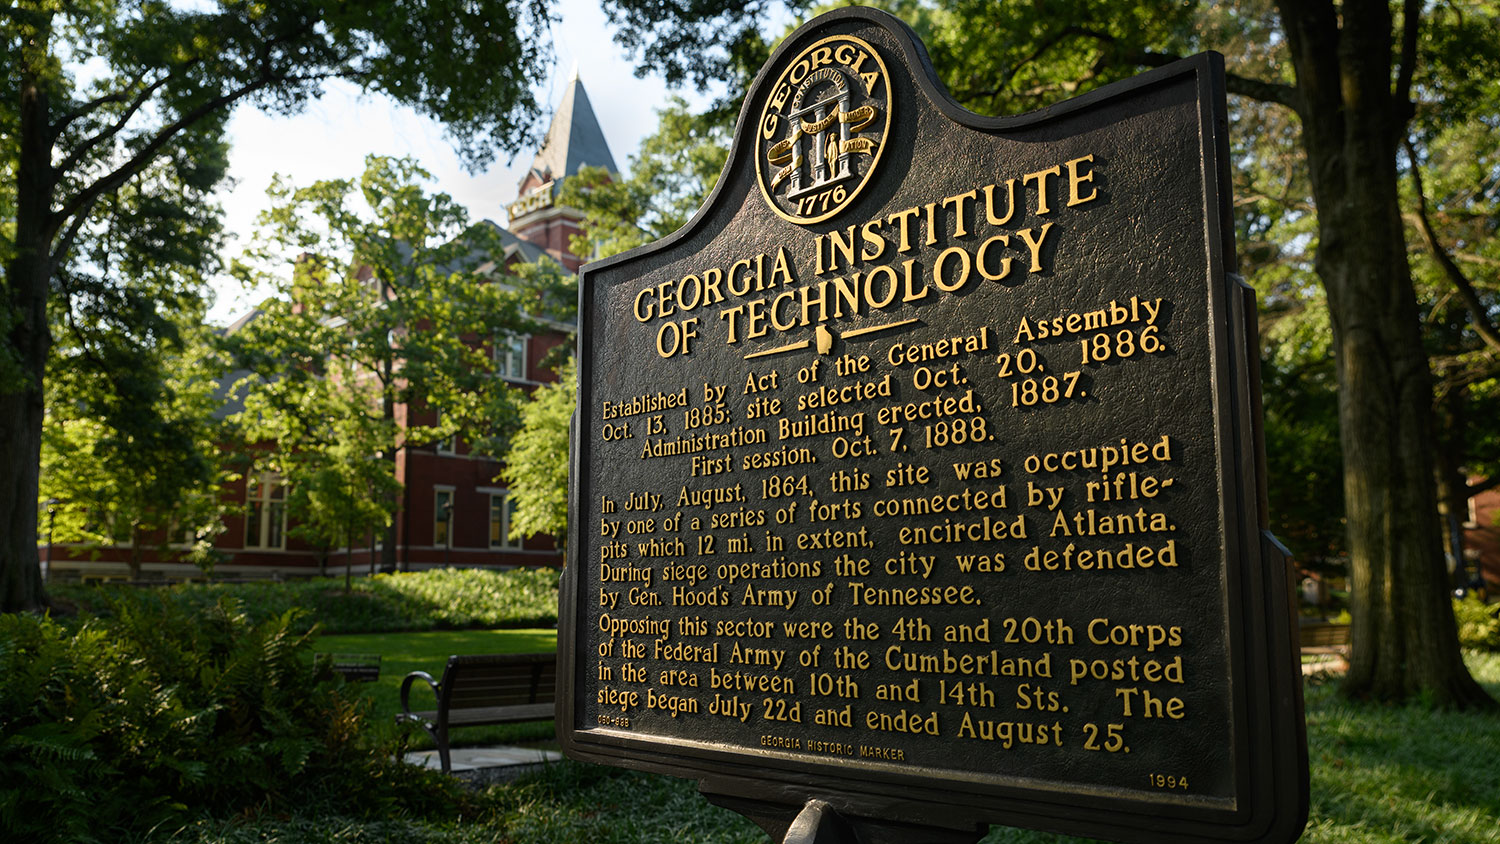 Historical marker on Georgia Tech's campus in Harrison Square. The marker reads "Georgia Institute of Technology | Established by Act of the General Assembly Oct. 13 1885; site selected Oct. 20, 1886. Administration building erected 1887. First session, Oct. 7, 1888. In July, August 1864, this site was occupied by one of a series of forts connected by rifle-pits which 12 mi. in extent, encircled Atlanta. During siege operations the city was defended by Gen. Hood's Army of Tennessee. 